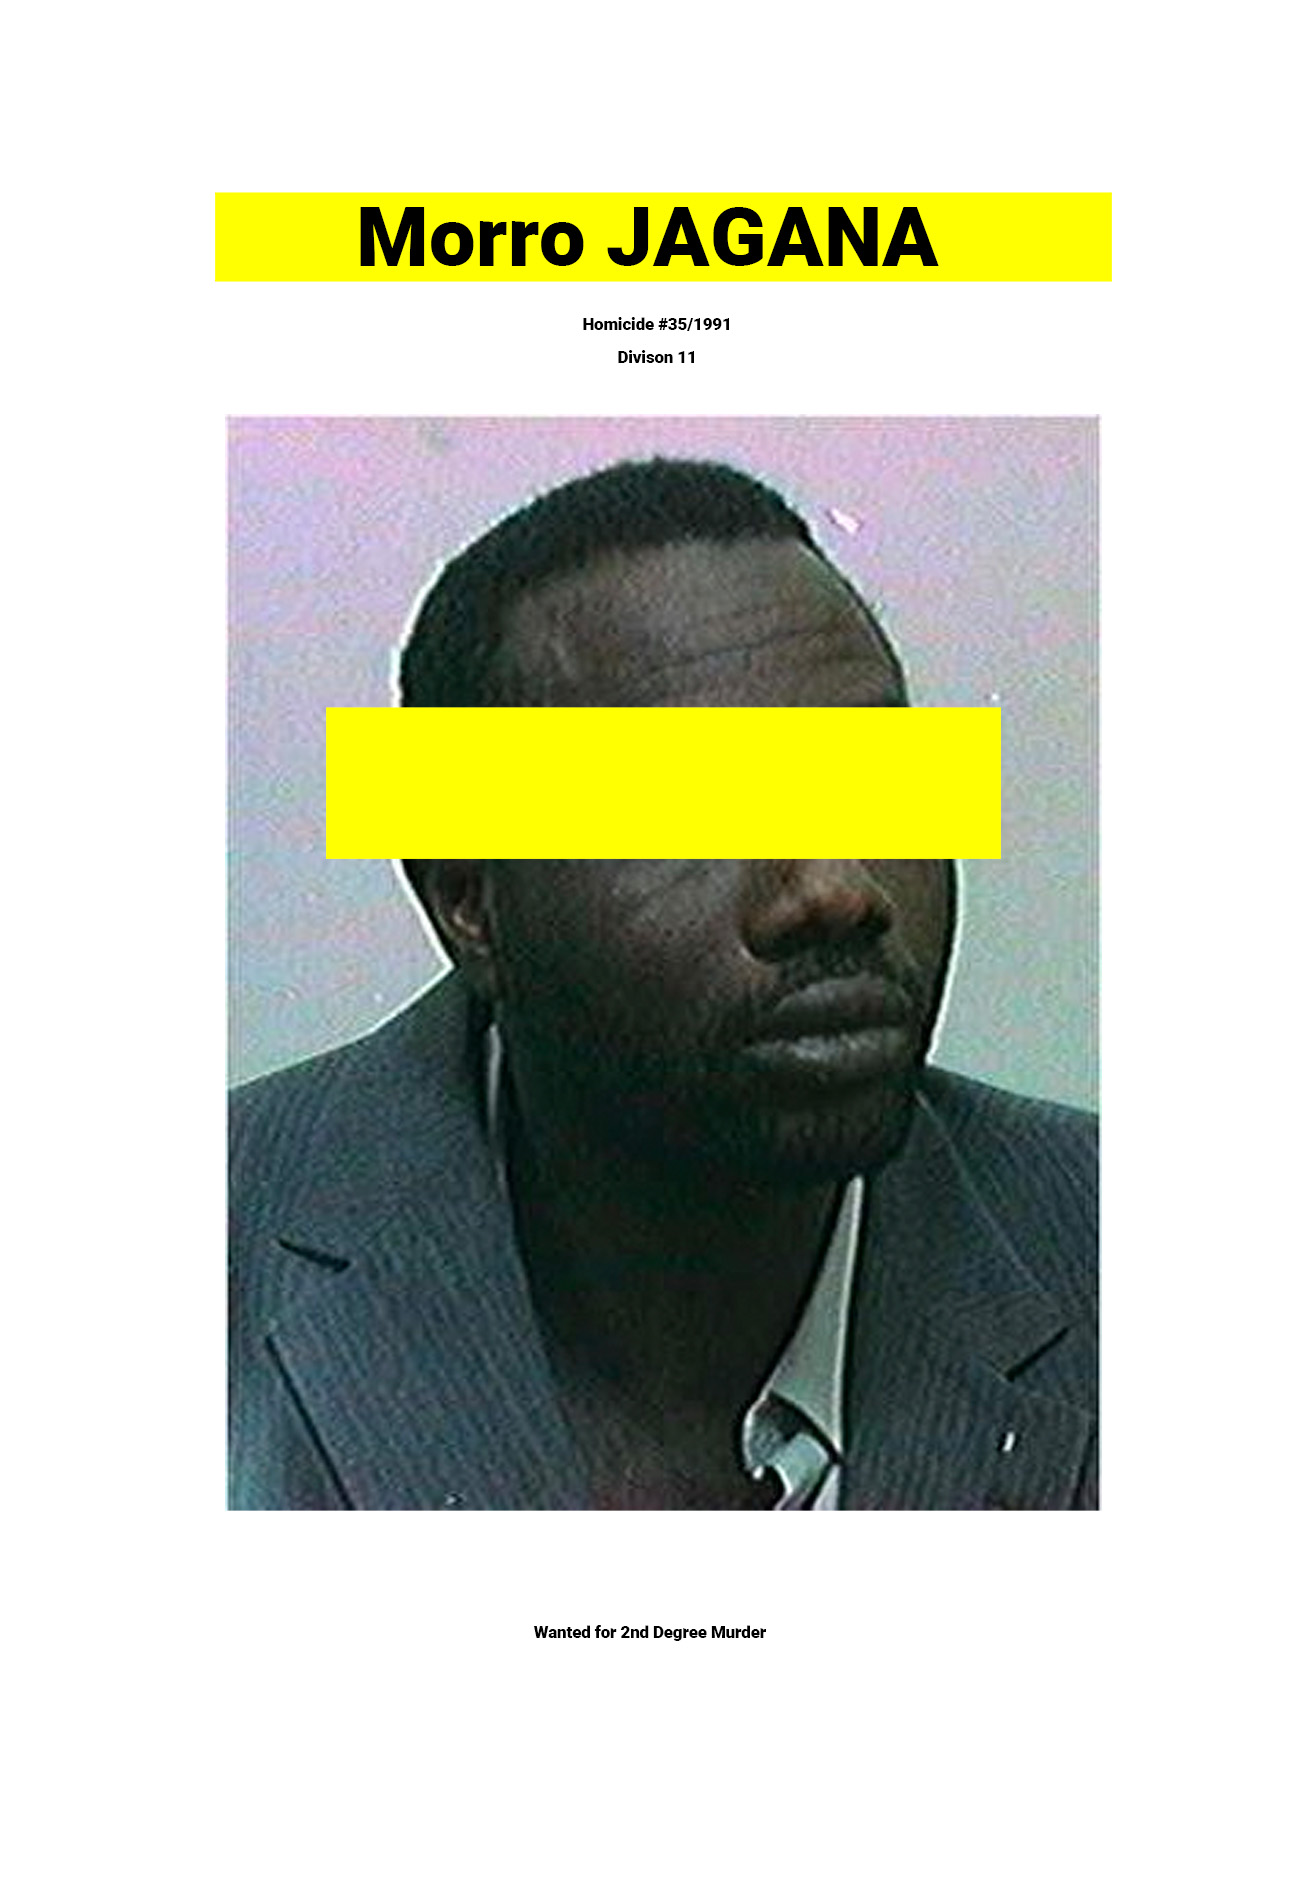 - A poster featuring an image of a man with his face partially covered. Text above the image says ‘Homicide #35/1991 Division 11’ and text below the image says ‘Wanted for 2nd Degree Murder’